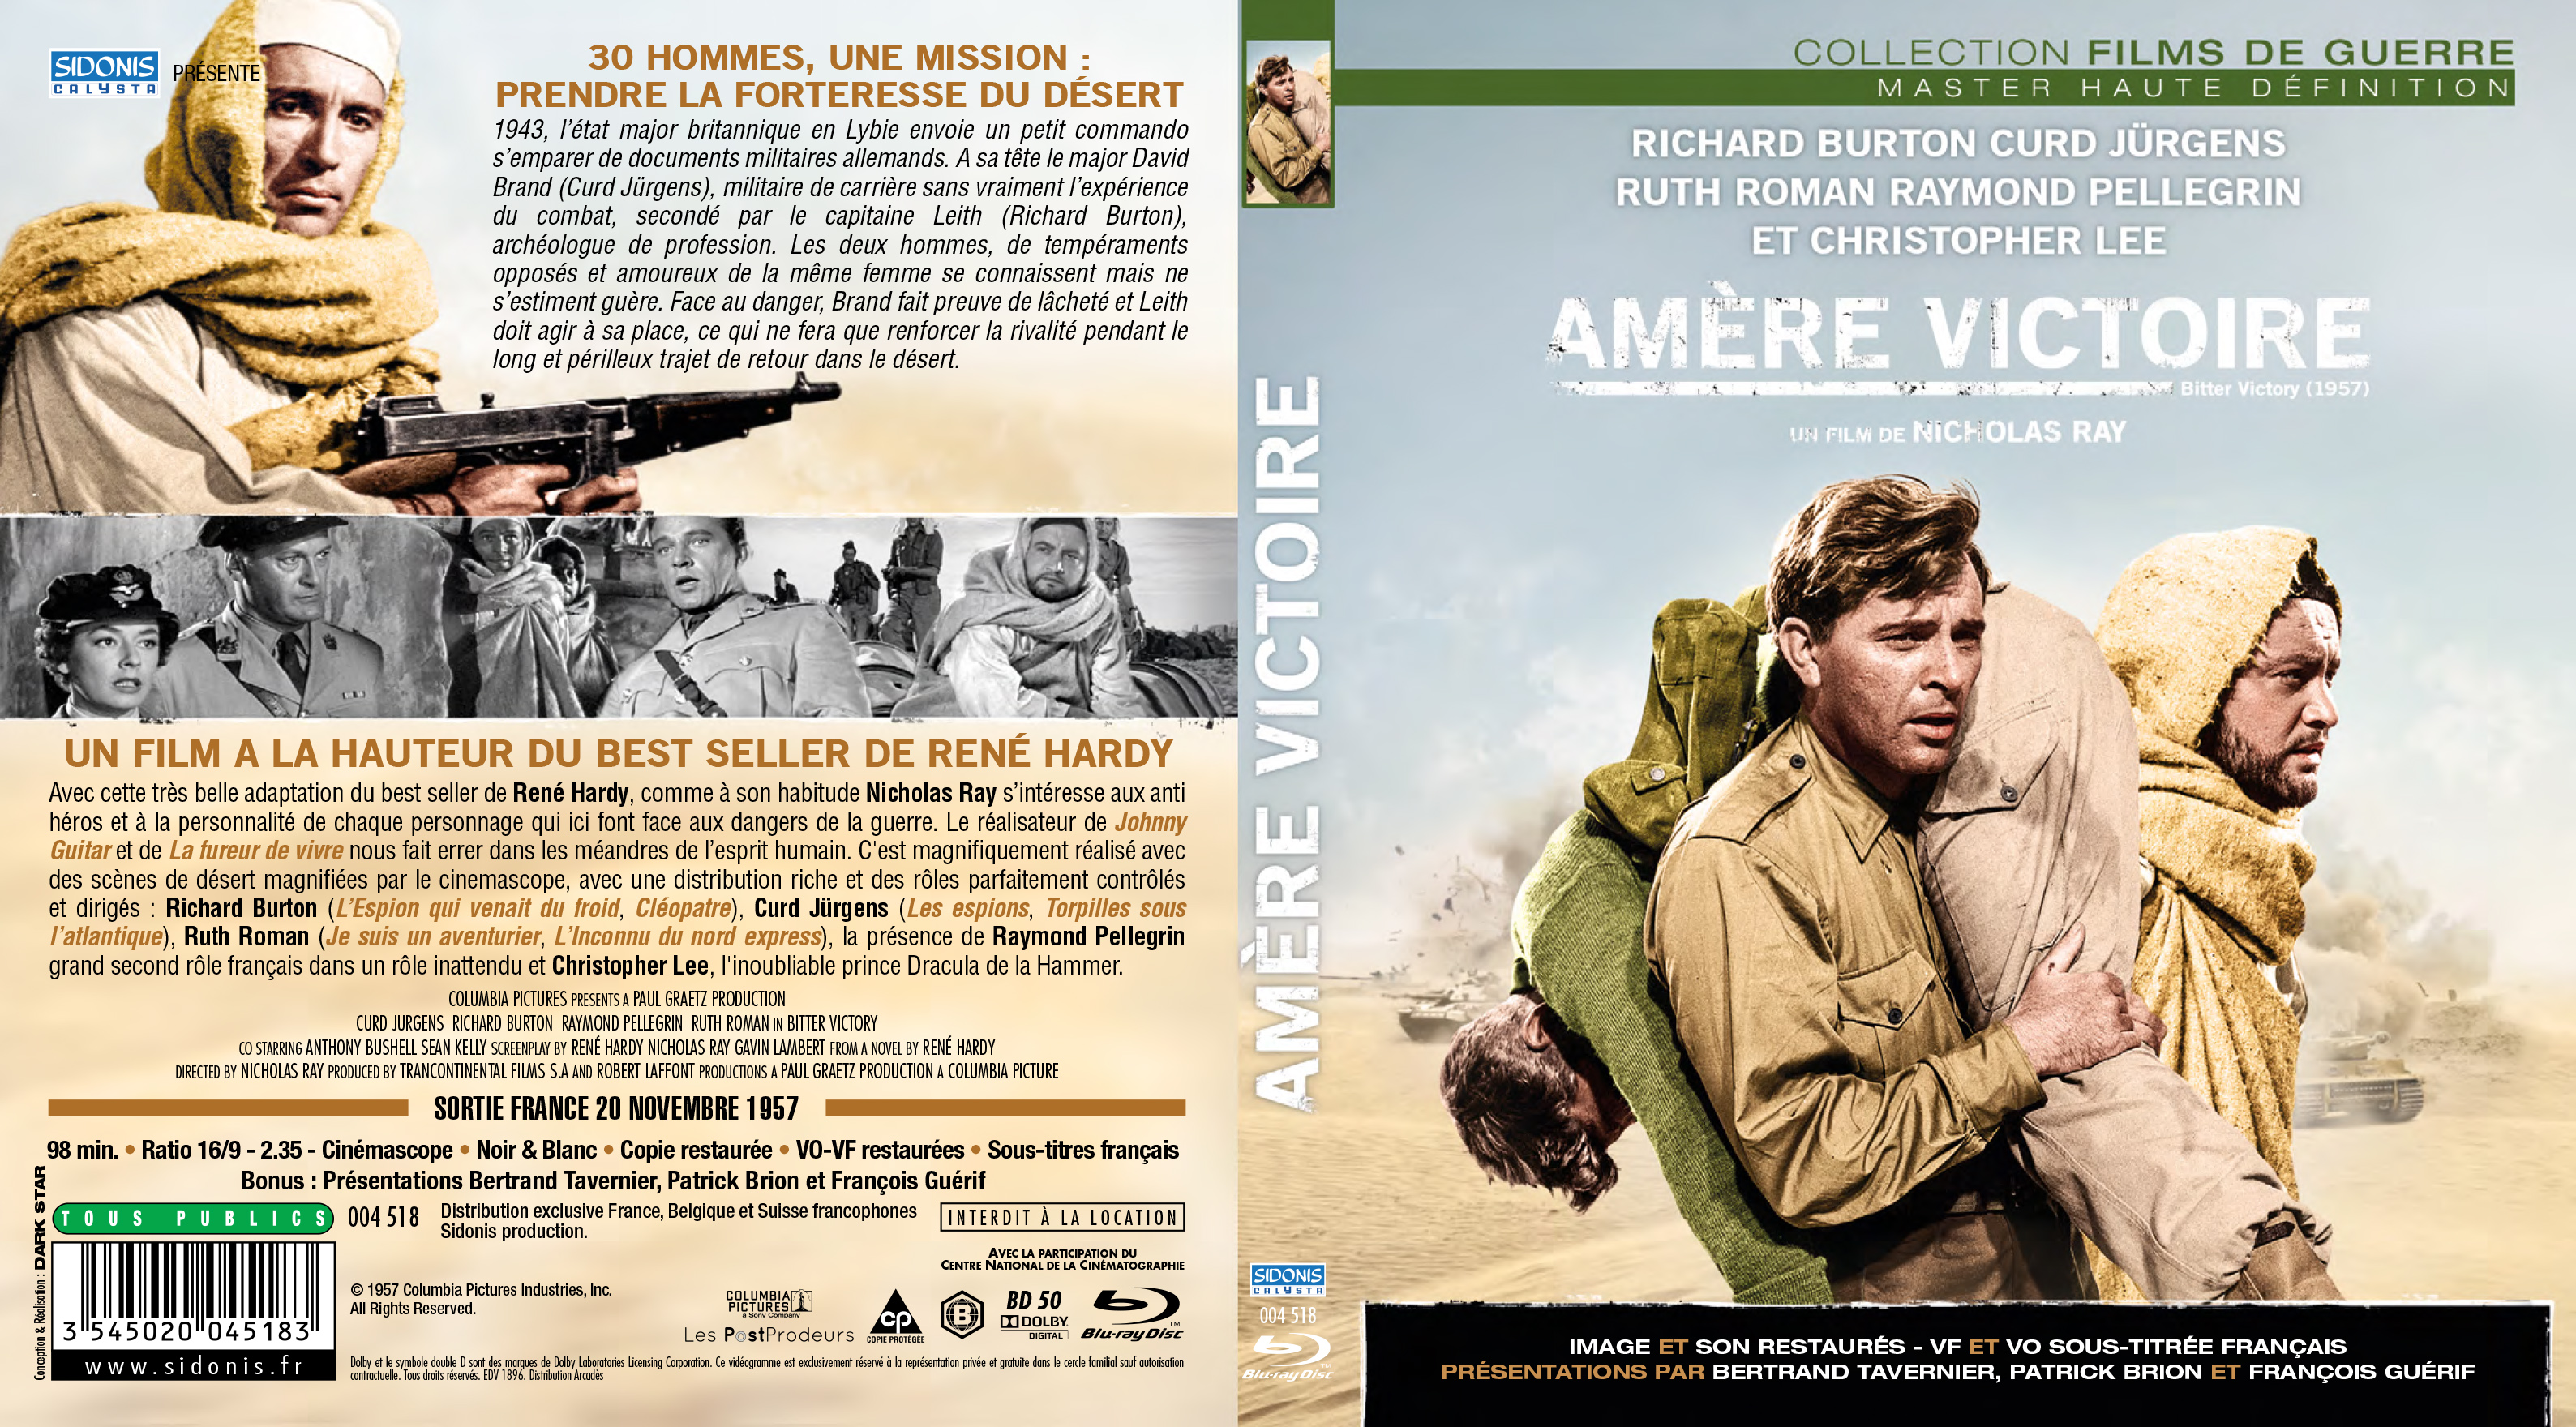 Jaquette DVD Amre victoire (BLU-RAY)